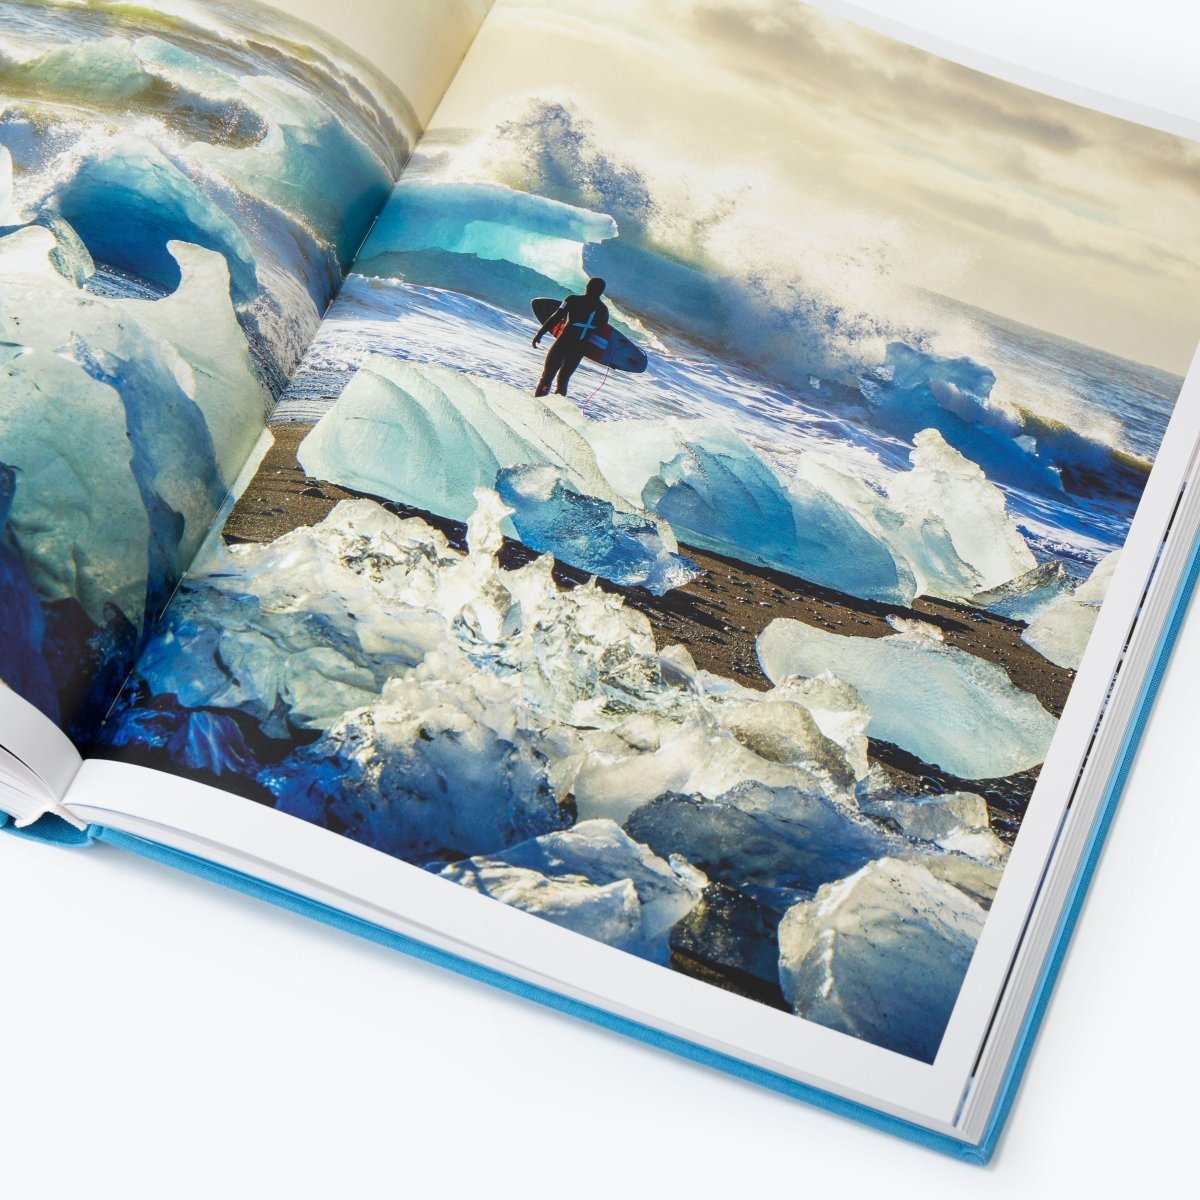 The Oceans: The Maritime Photography of Chris Burkard (Hardcover) - Accessories